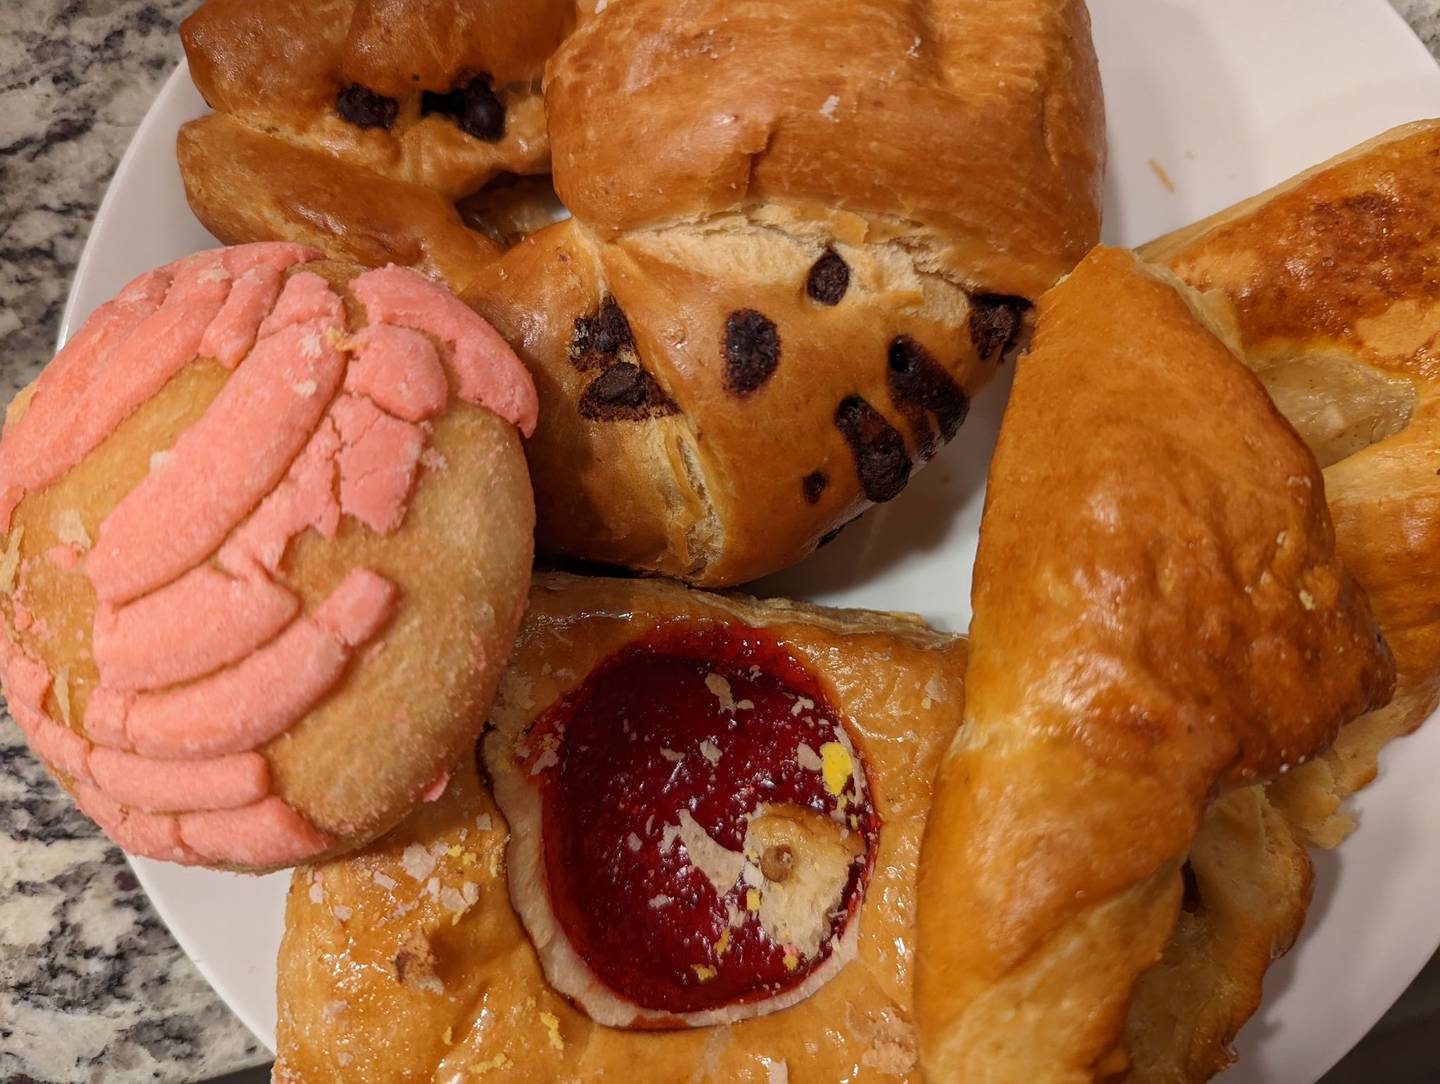 La Chicanita Bakery in Crest Hill offers a wide variety of homemade breads and pastries, juices, sandwiches and custom cakes. The pink-topped item at the left is a concha, a sweet, brioche-like pastry. Also pictured are two fruit danishes and a chocolate croissant.